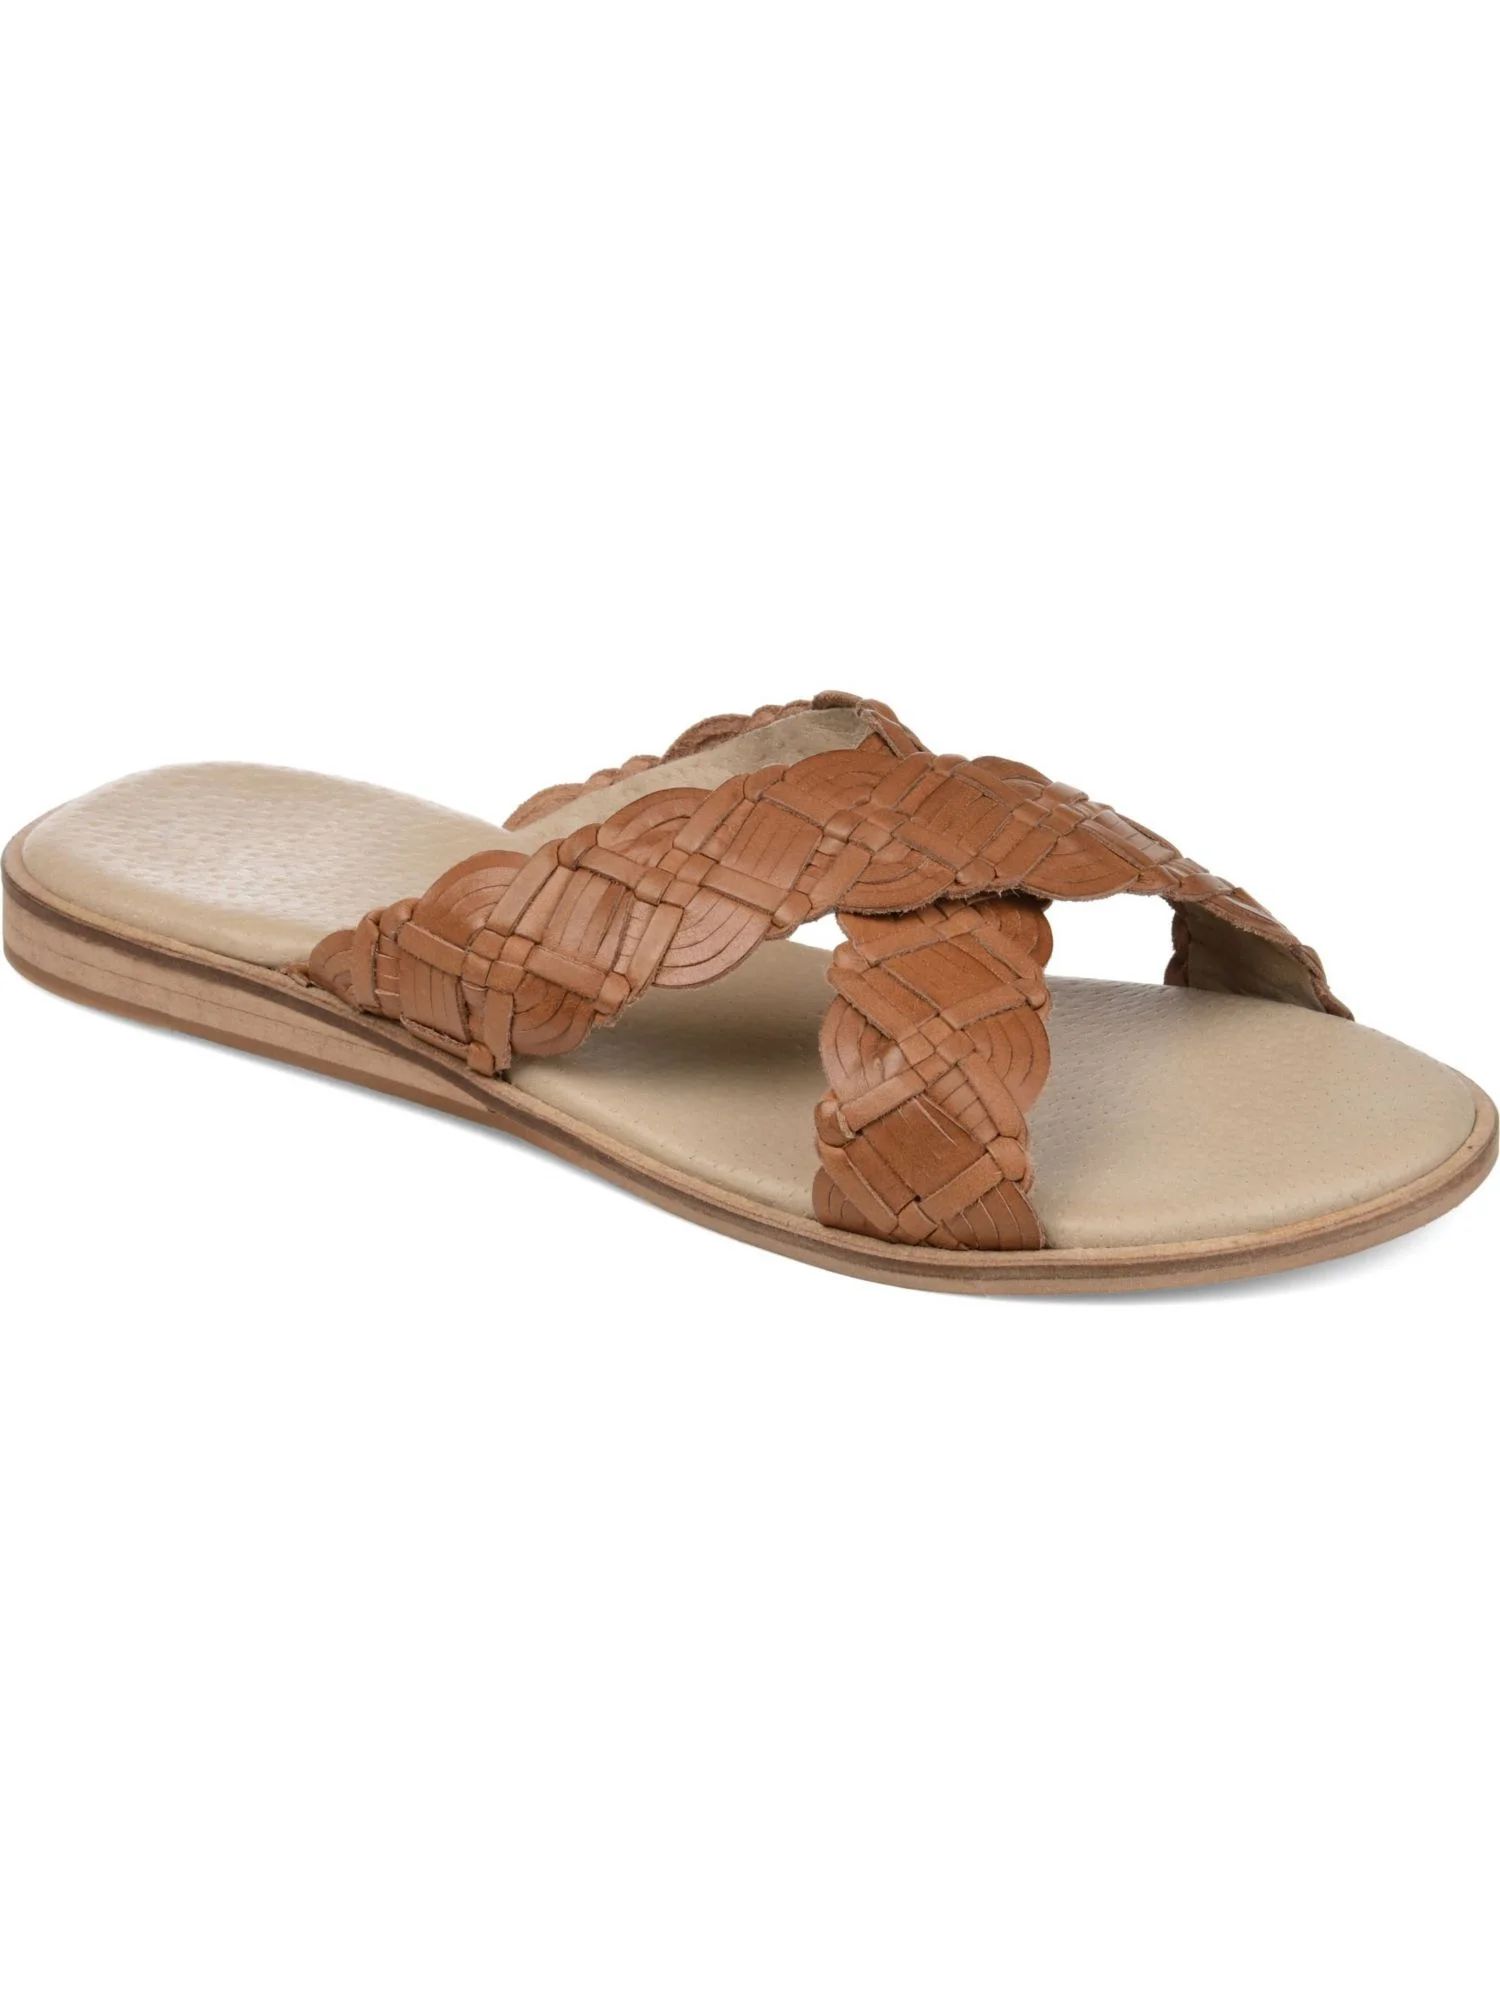 JOURNEE COLLECTION Womens Brown Braided Crisscross Straps Bryson Round Toe Slip On Leather Sandal... | Walmart (US)